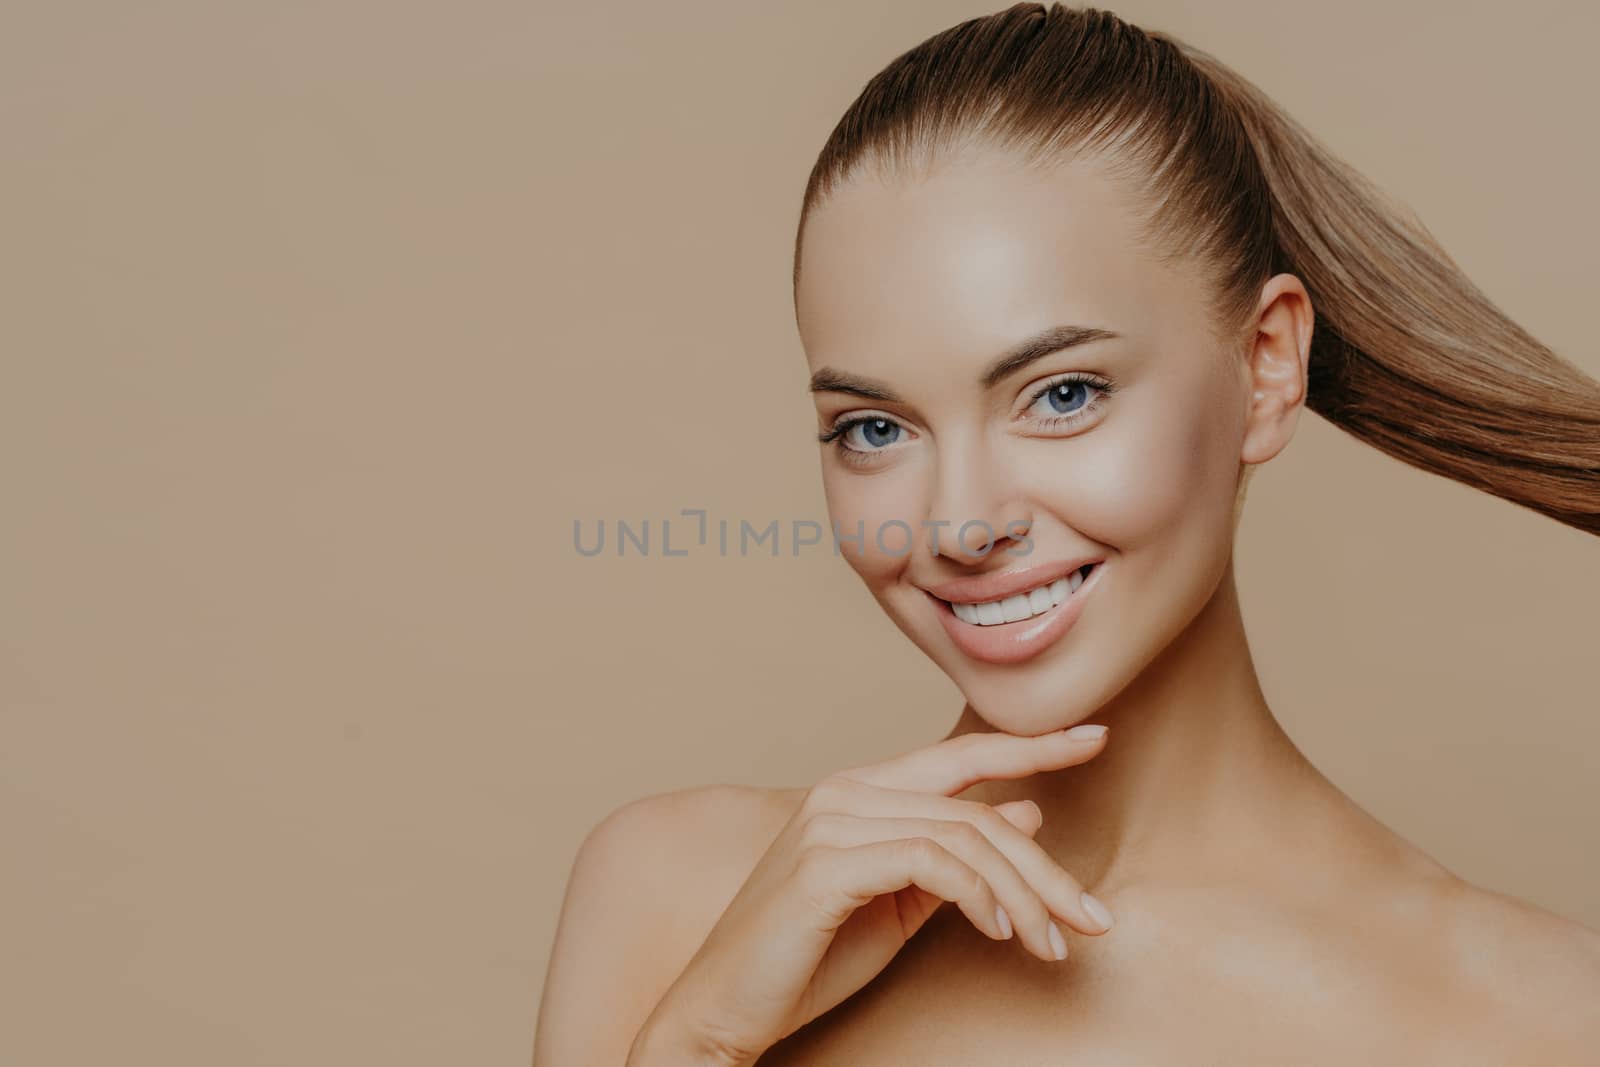 Tranquil undressed woman with healthy perfect skin, dark hair combed in pony tail, enjoys facial treatments, has well cared complexion, stands against beige studio wall, empty space. Skin care concept by vkstock